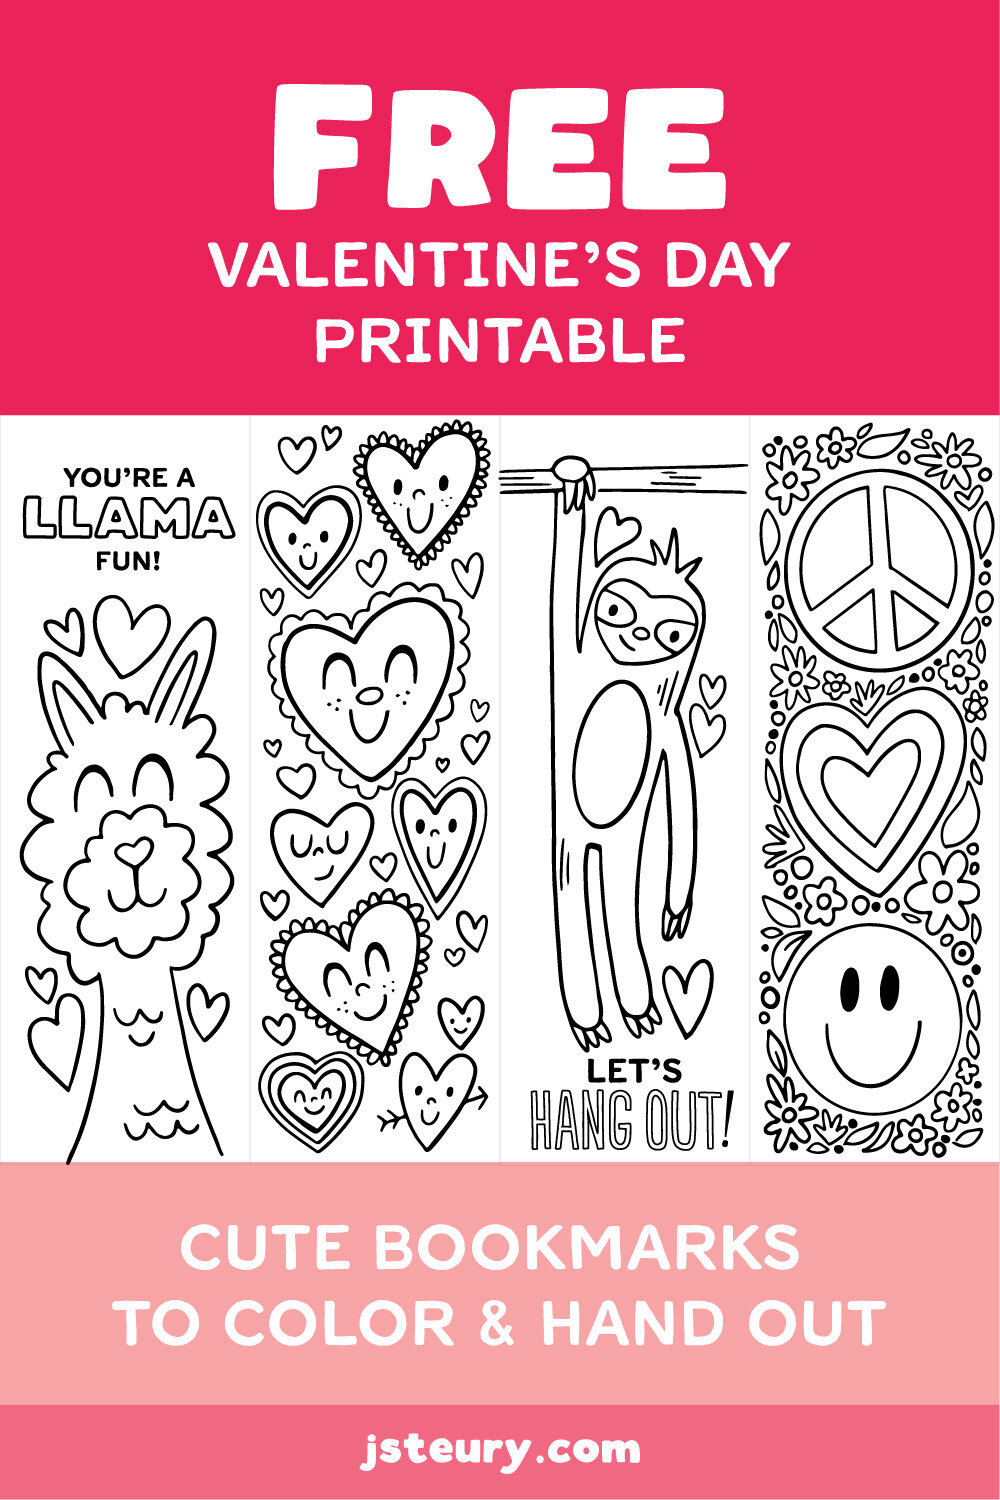 valentine-s-day-printables-bookmarks-bookmarks-google-and-candy-grams